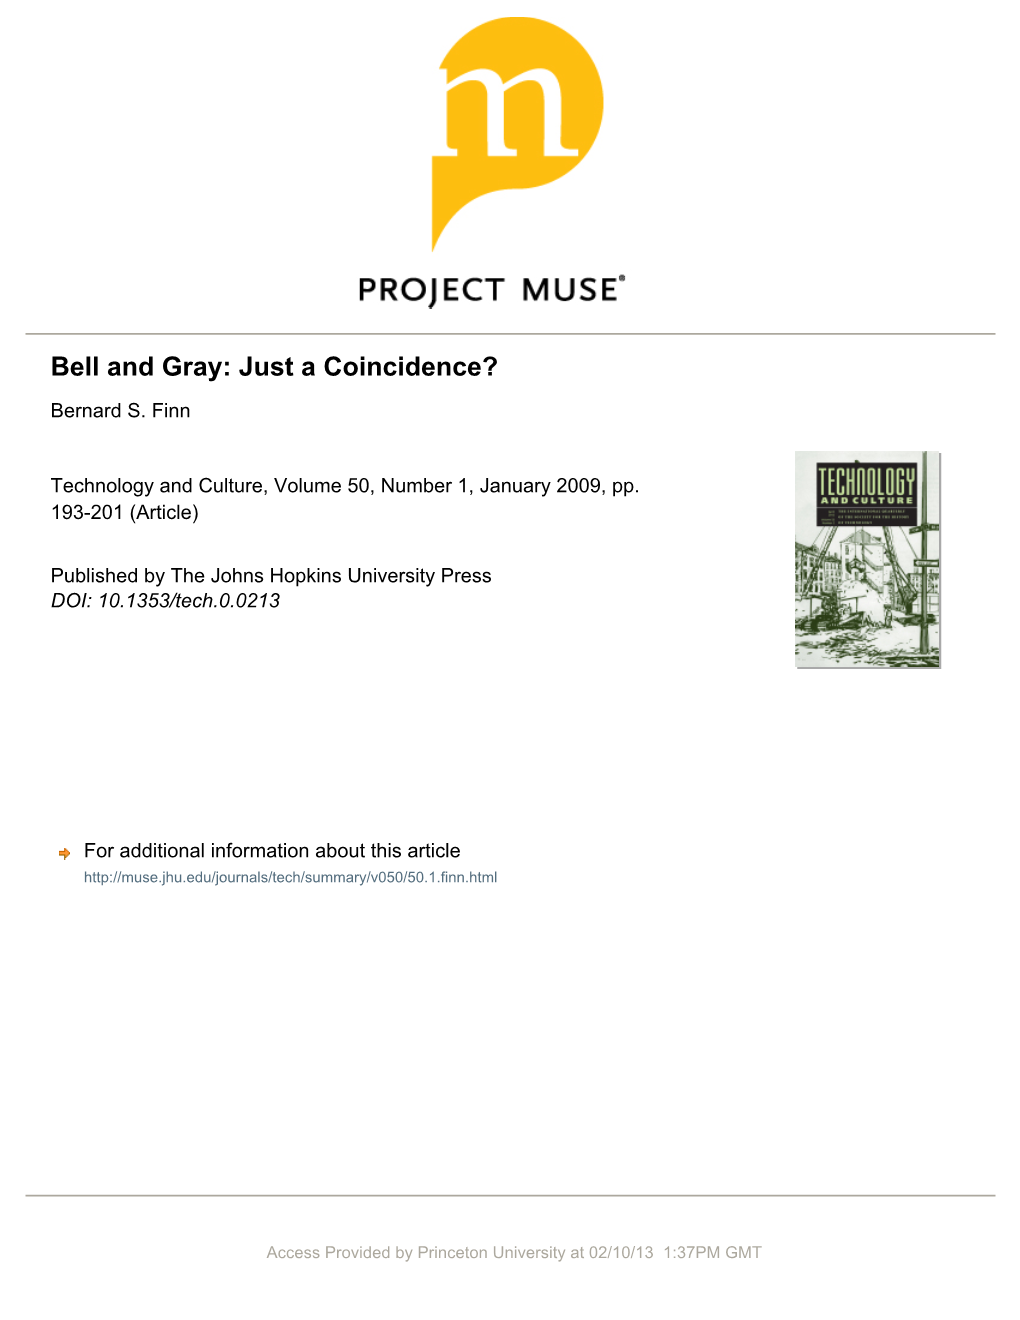 Bell and Gray: Just a Coincidence?